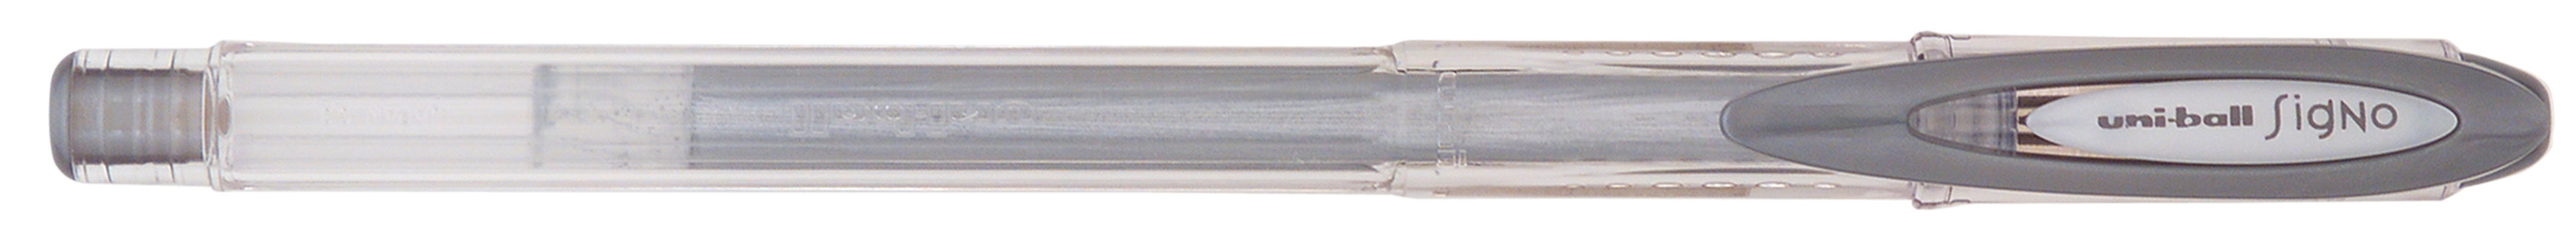 UNI-BALL Signo Noble Metal 0.8mm UM120NMSILVE argent